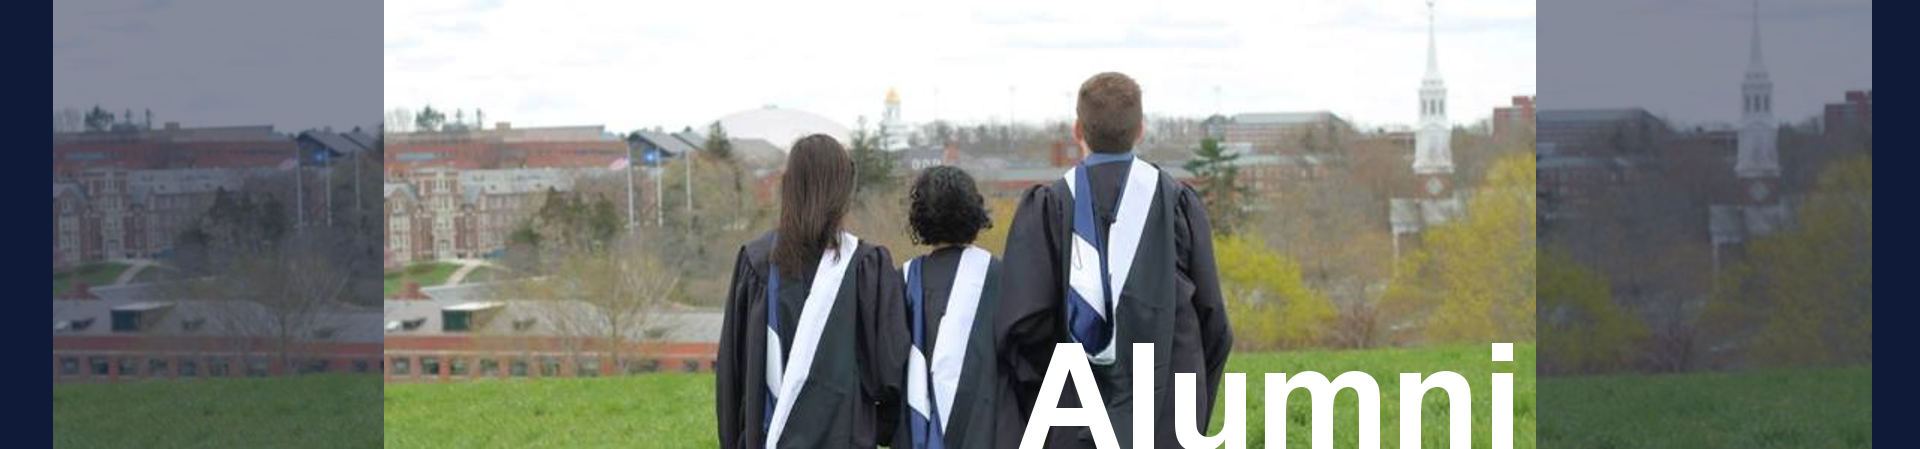 3 recent graduates looking over campus from atop a hill.  Text on the photo states "Alumni"